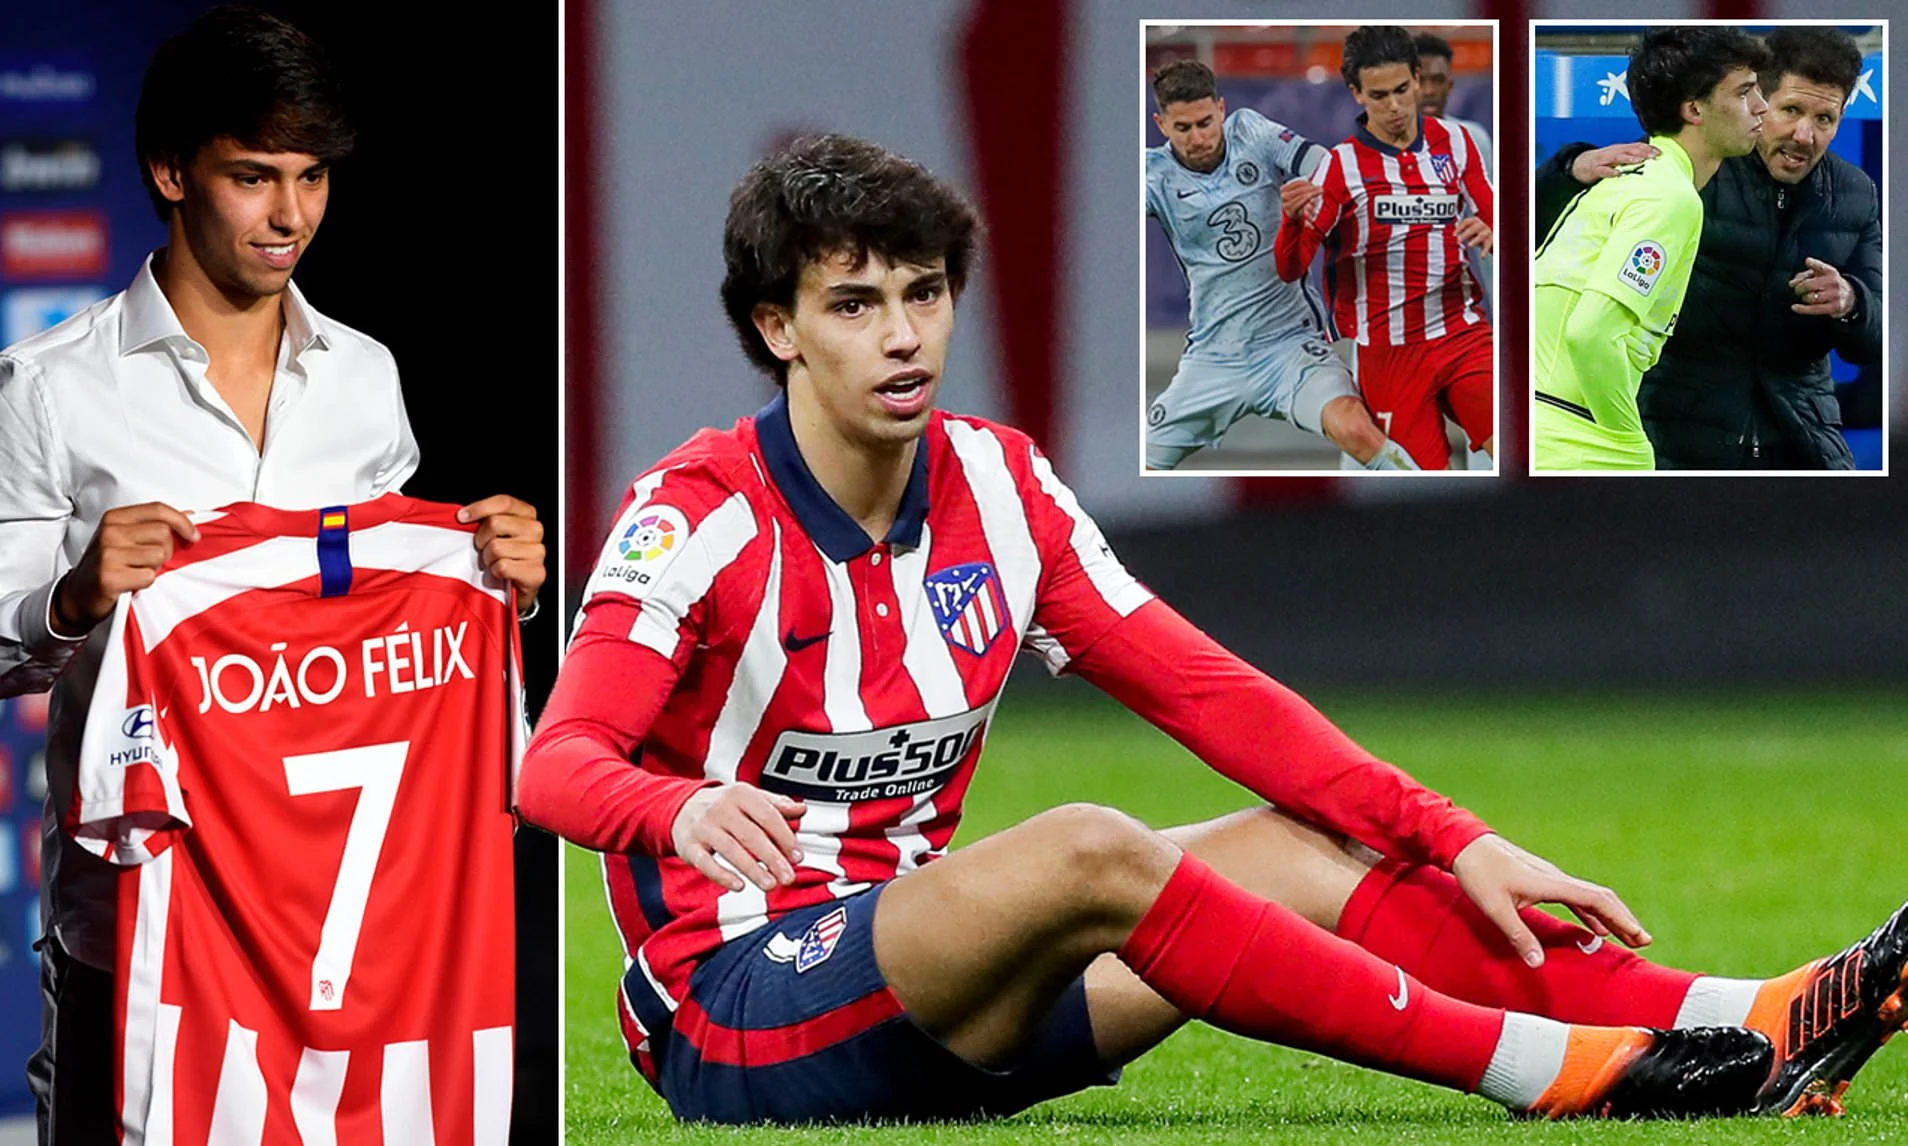 Atletico Madrid’s Joao Felix begins training with academy players during preseason session